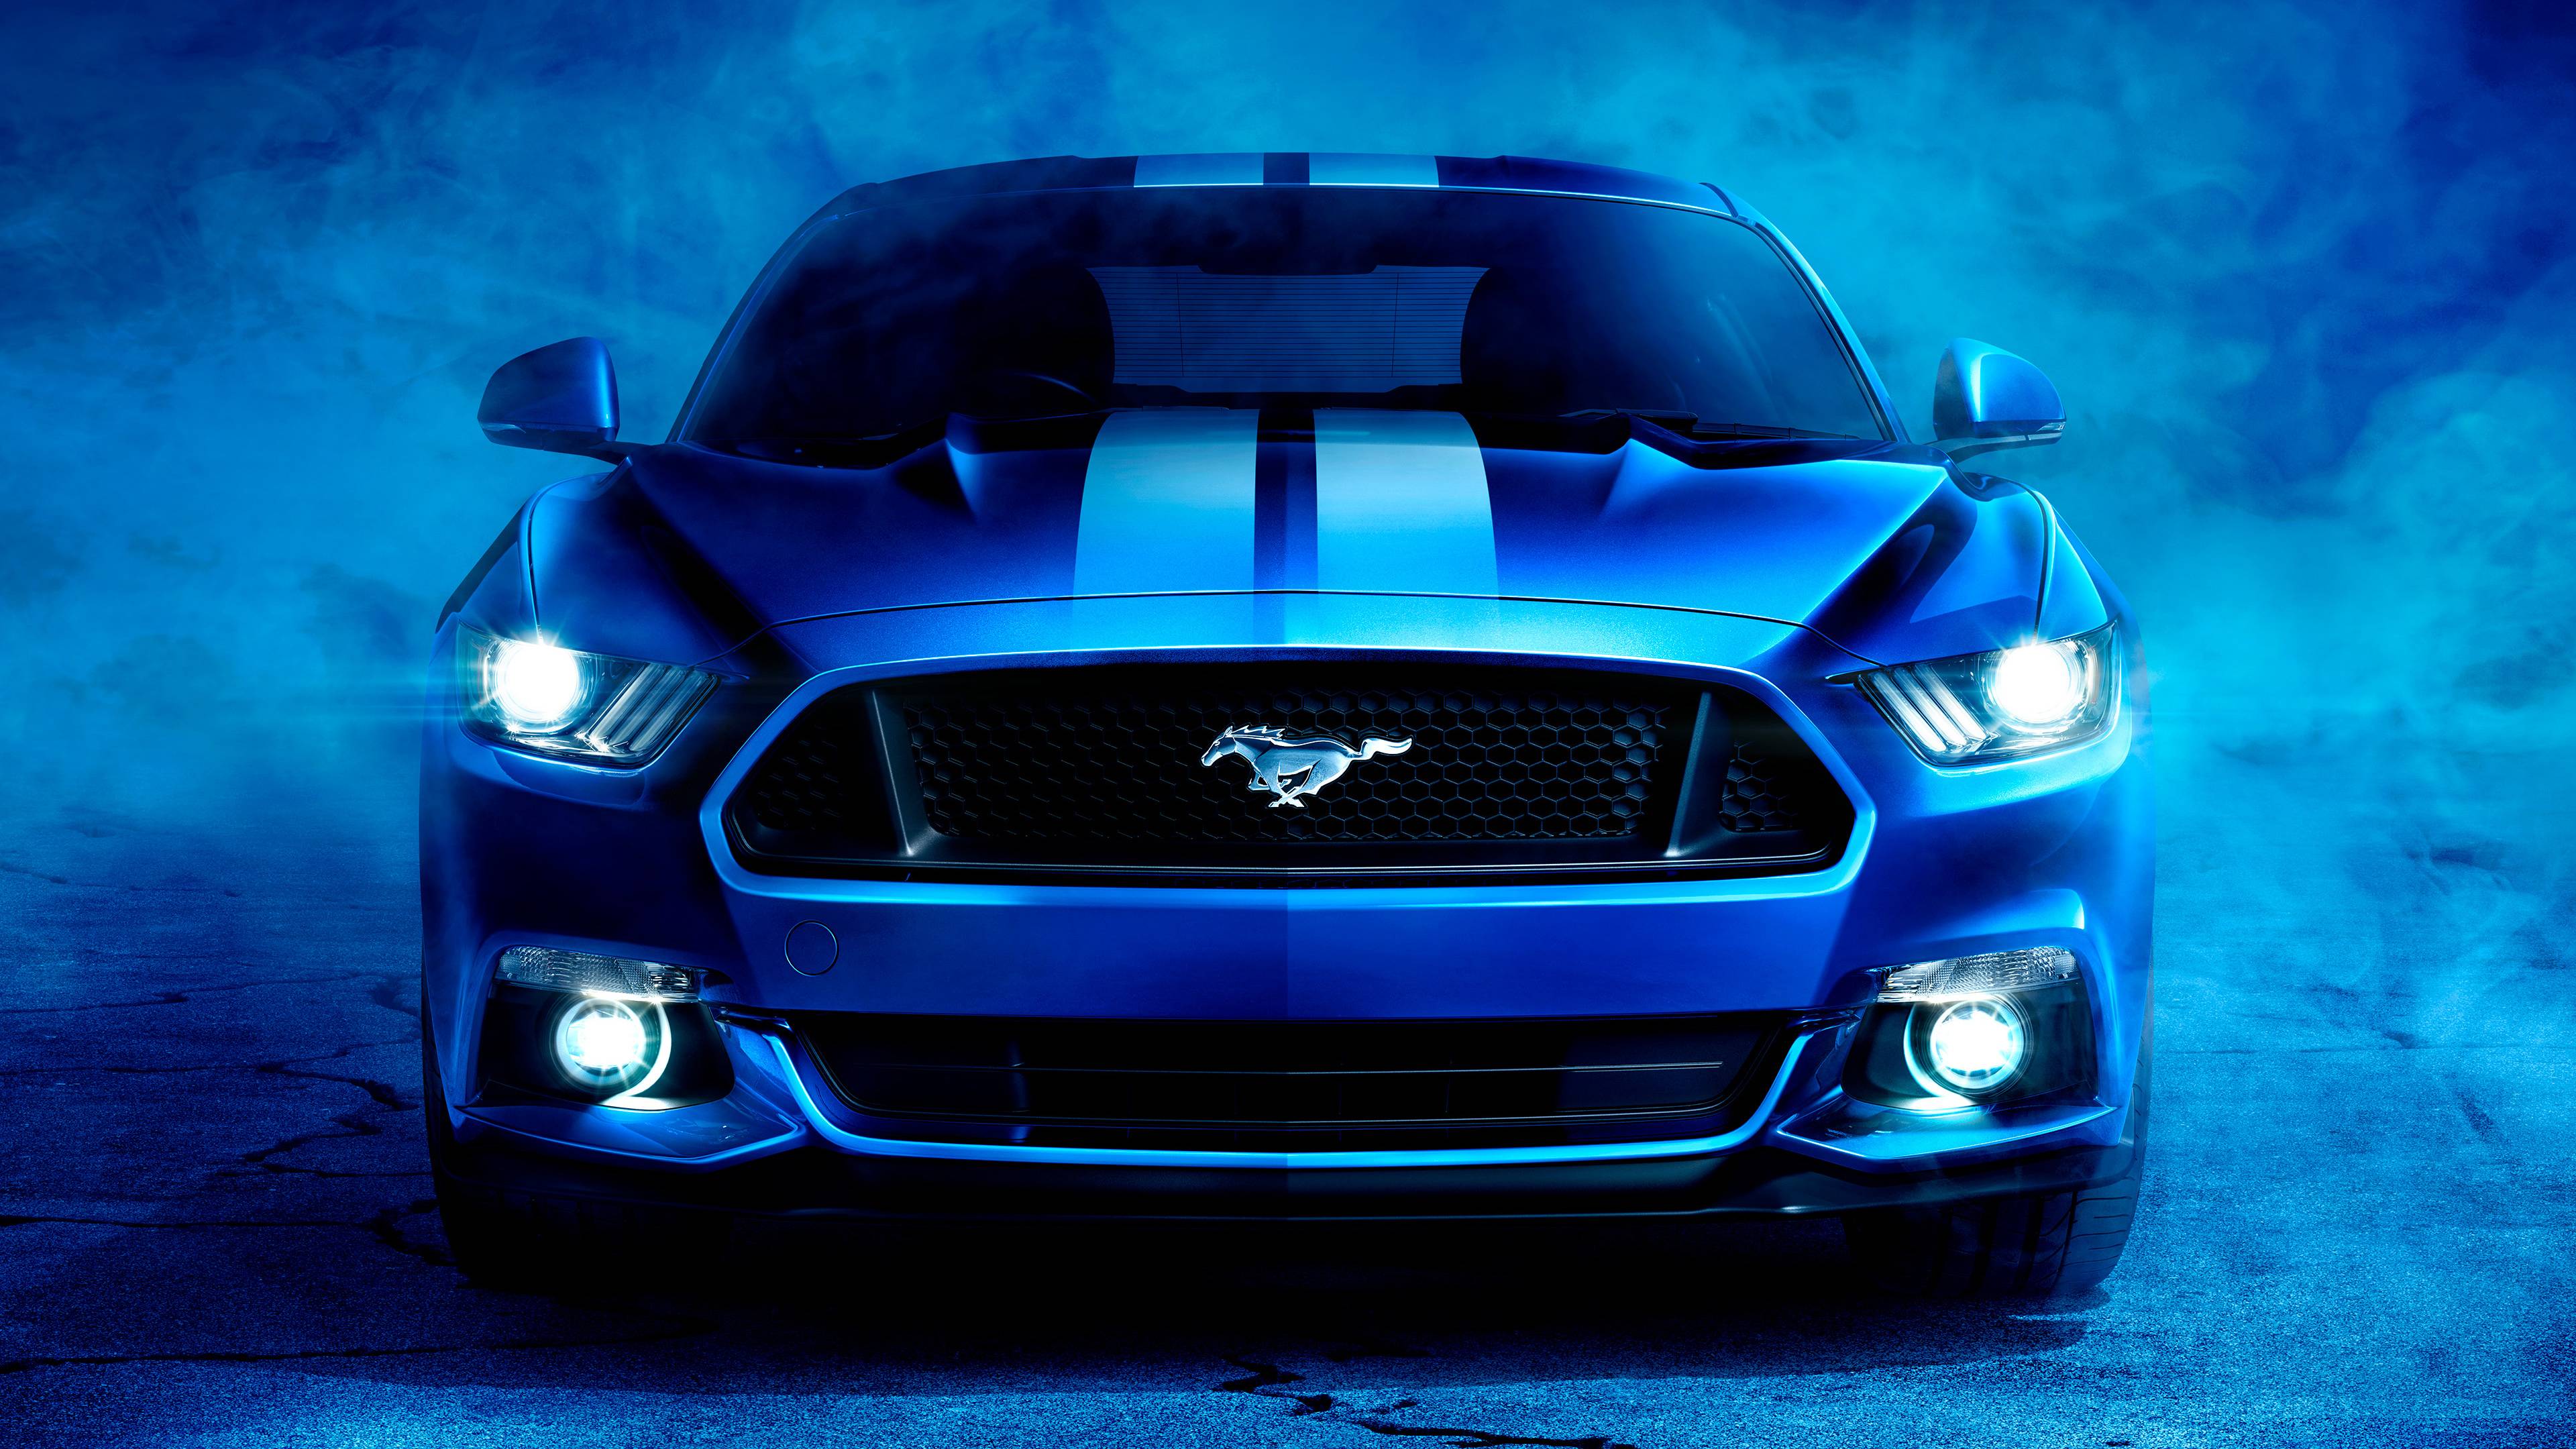 Ford Mustang Dual Monitor Wallpaper Free Ford Mustang Dual Monitor Background